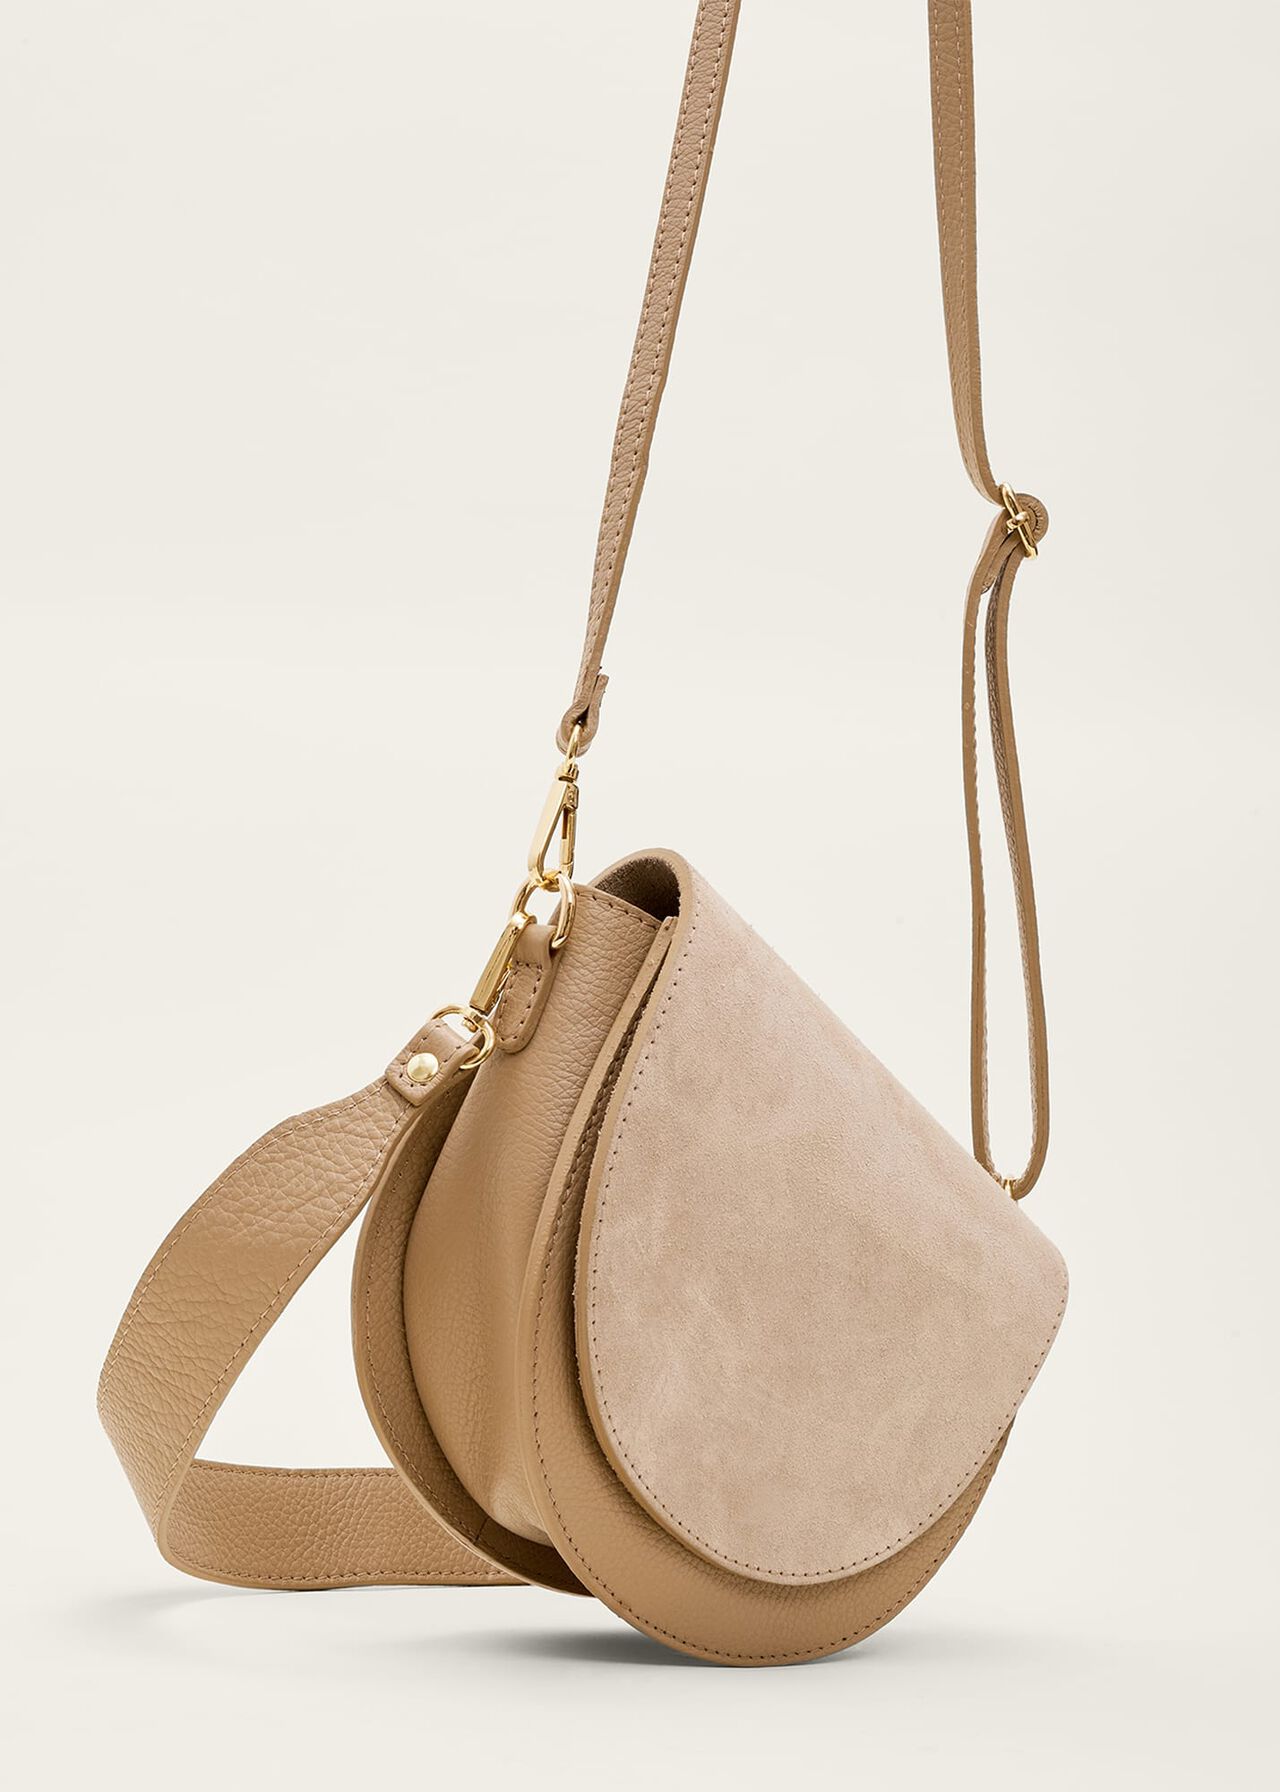 Suede Leather Cross Body Bag